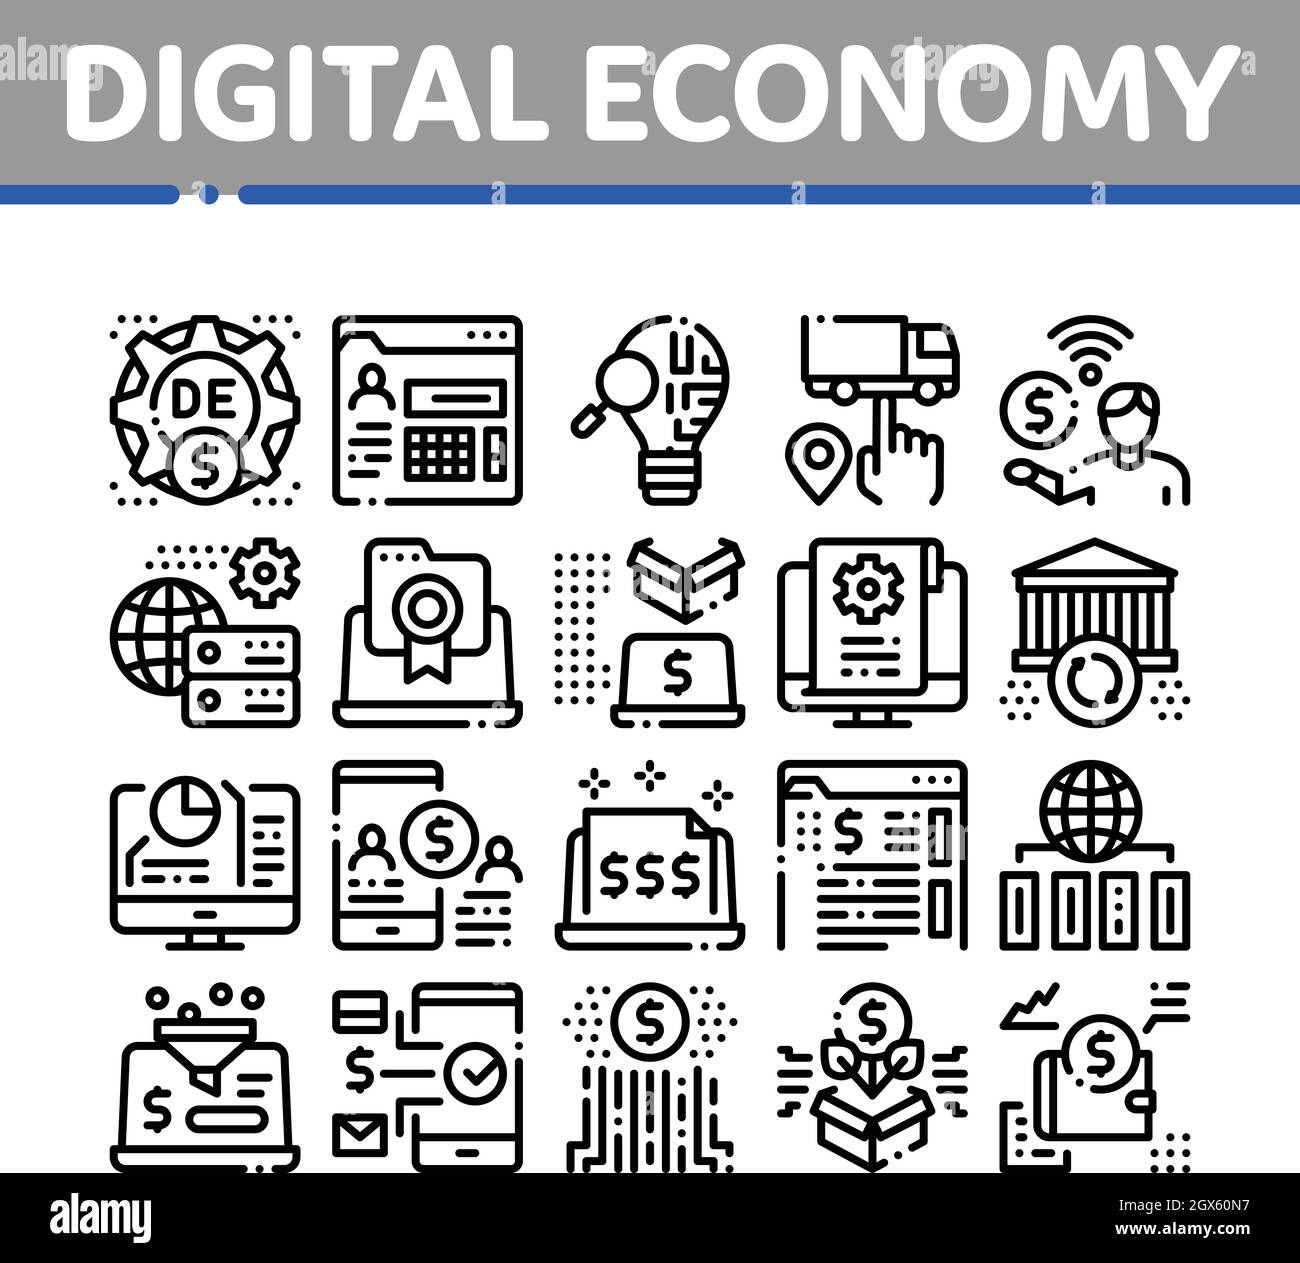 Digital Economy And E-business Icons Set Vector Stock Vector